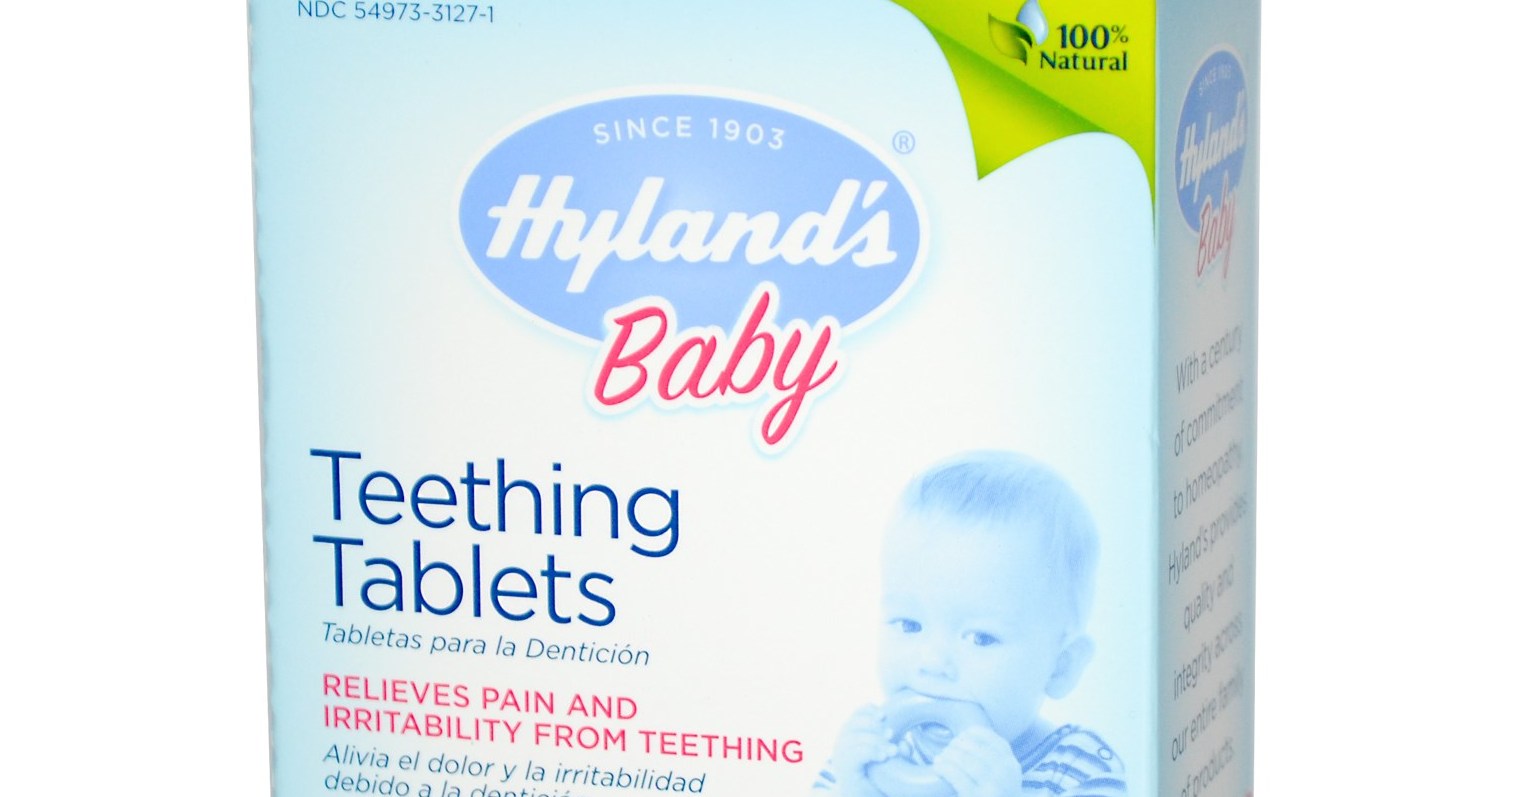 FDA Once Again Finds Elevated Levels Of Belladonna In Some Hyland’s Homeopathic Teething Tablets